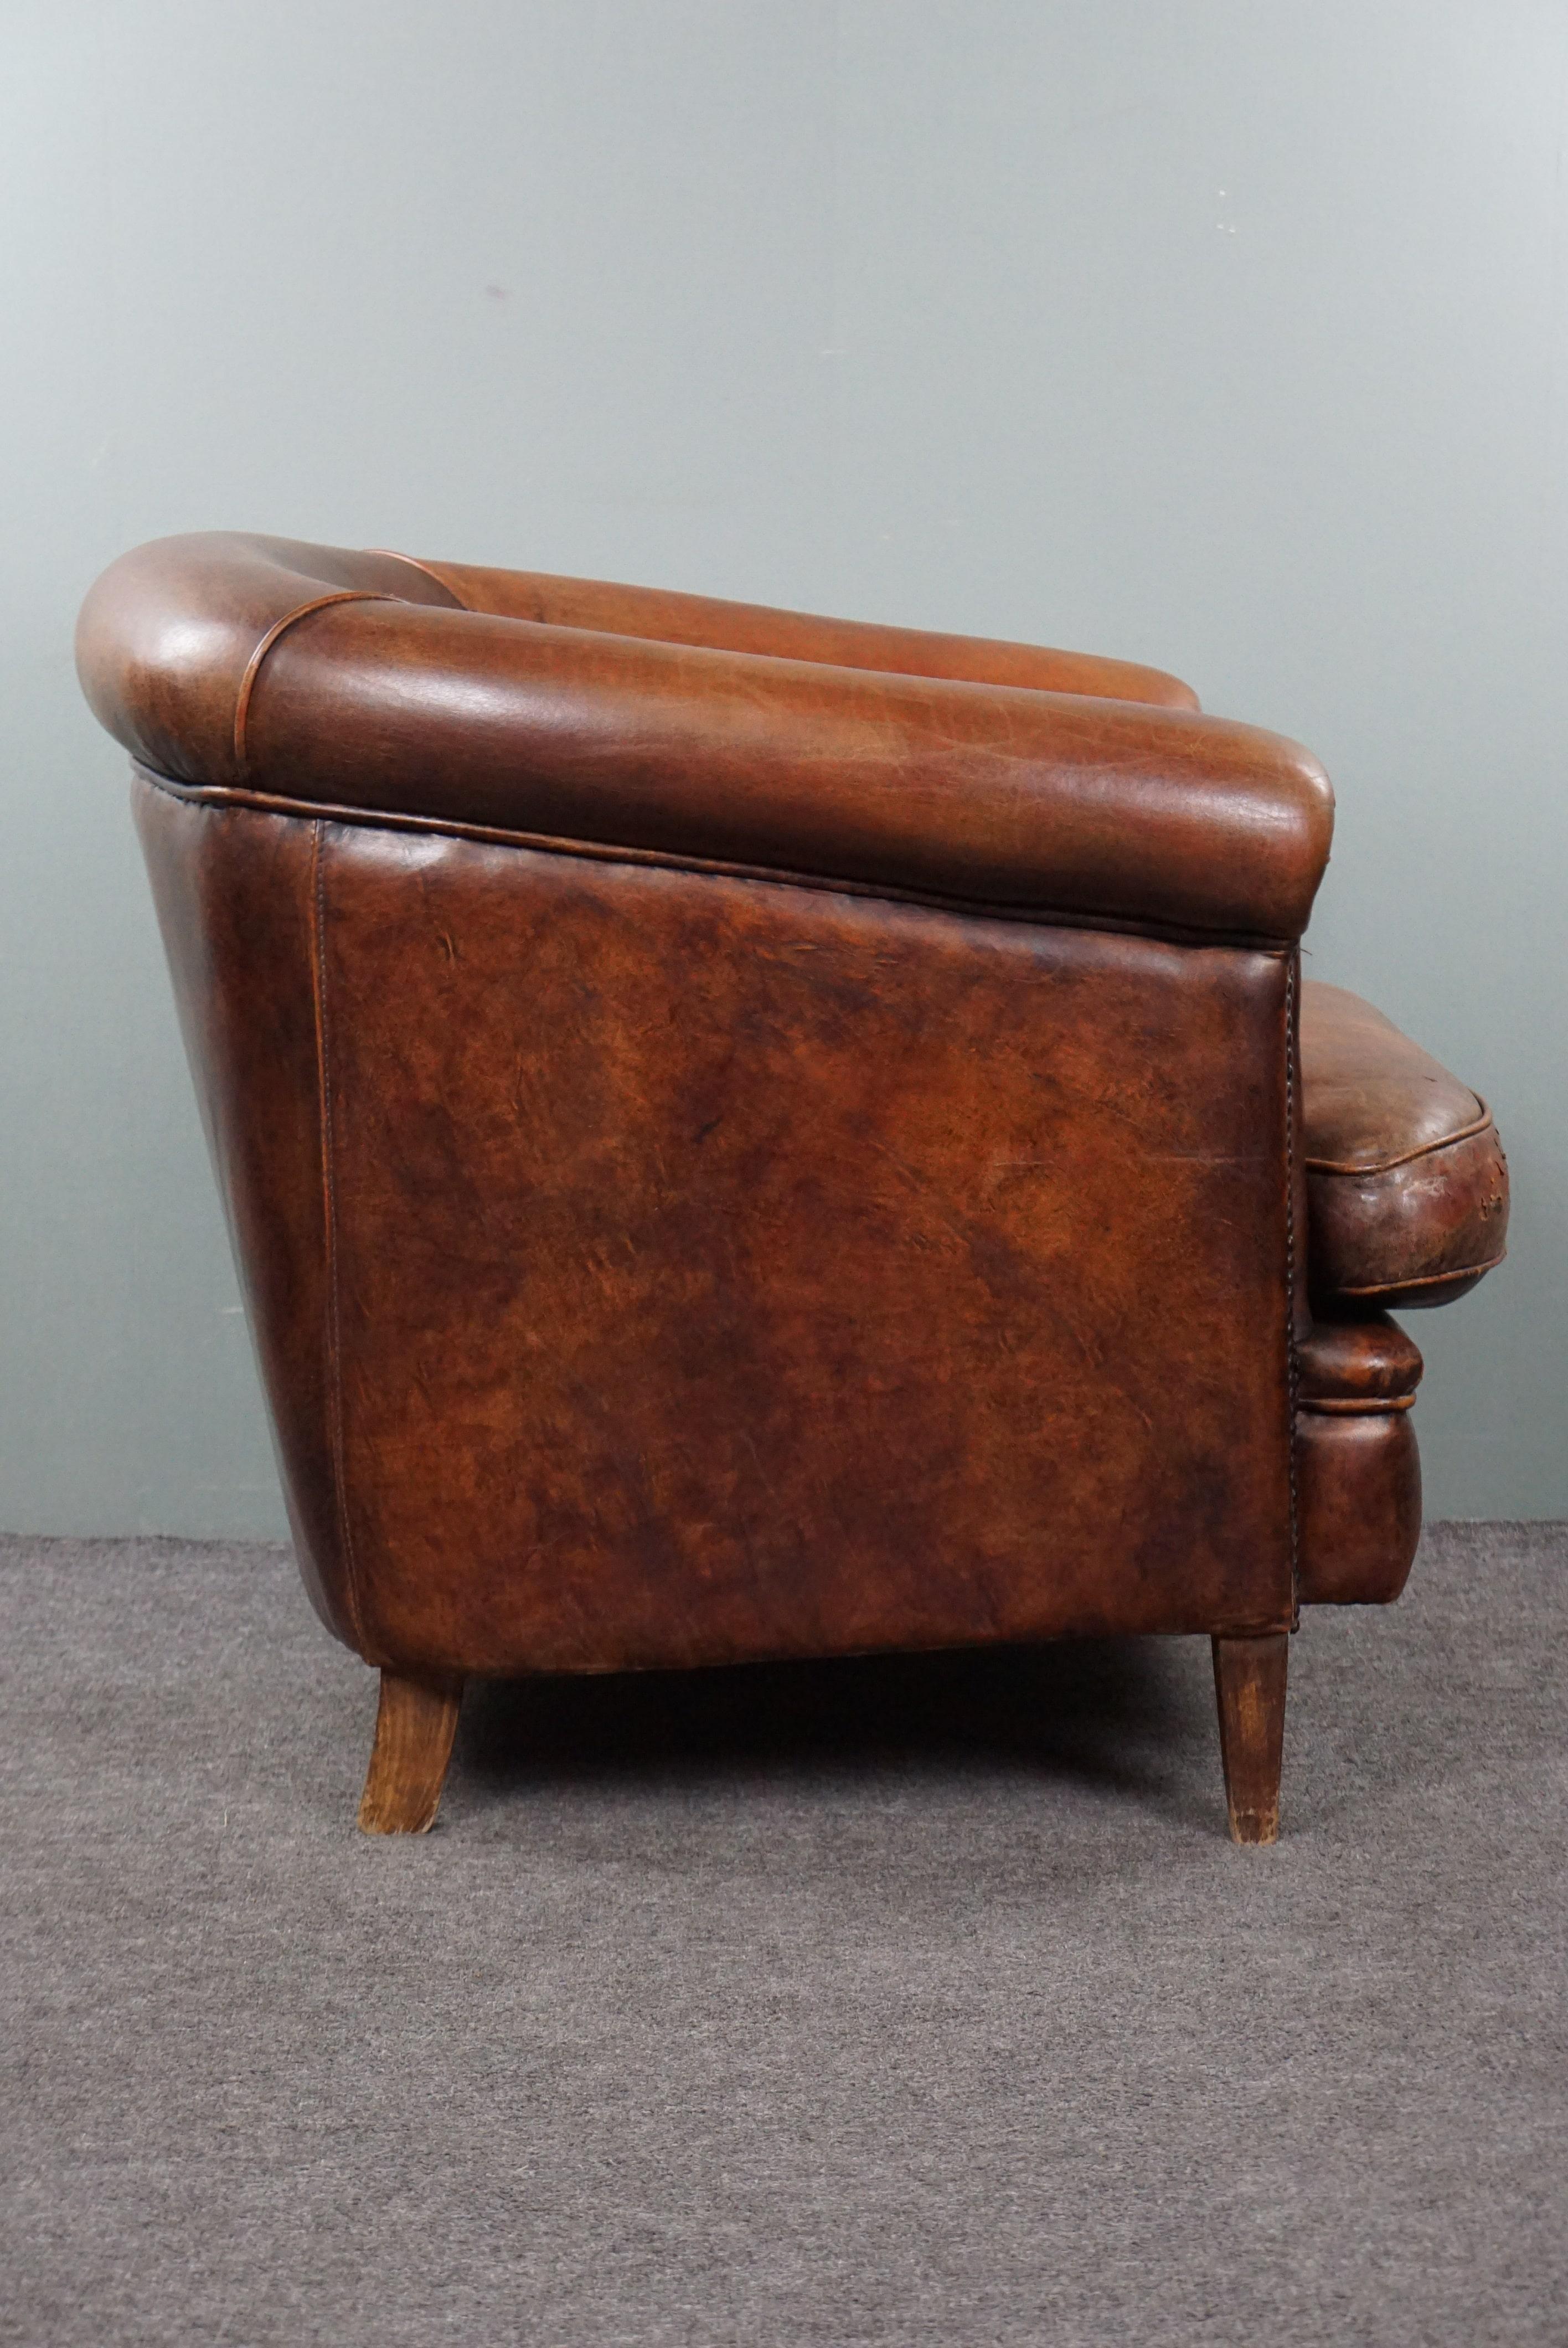 Offered is this handsome, robust sheep leather club armchair in a rich cognac color with a comfortable seat. This sturdy yet comfortable sheep leather armchair will warmly welcome you every day after a hard day's work.

Despite, or perhaps because